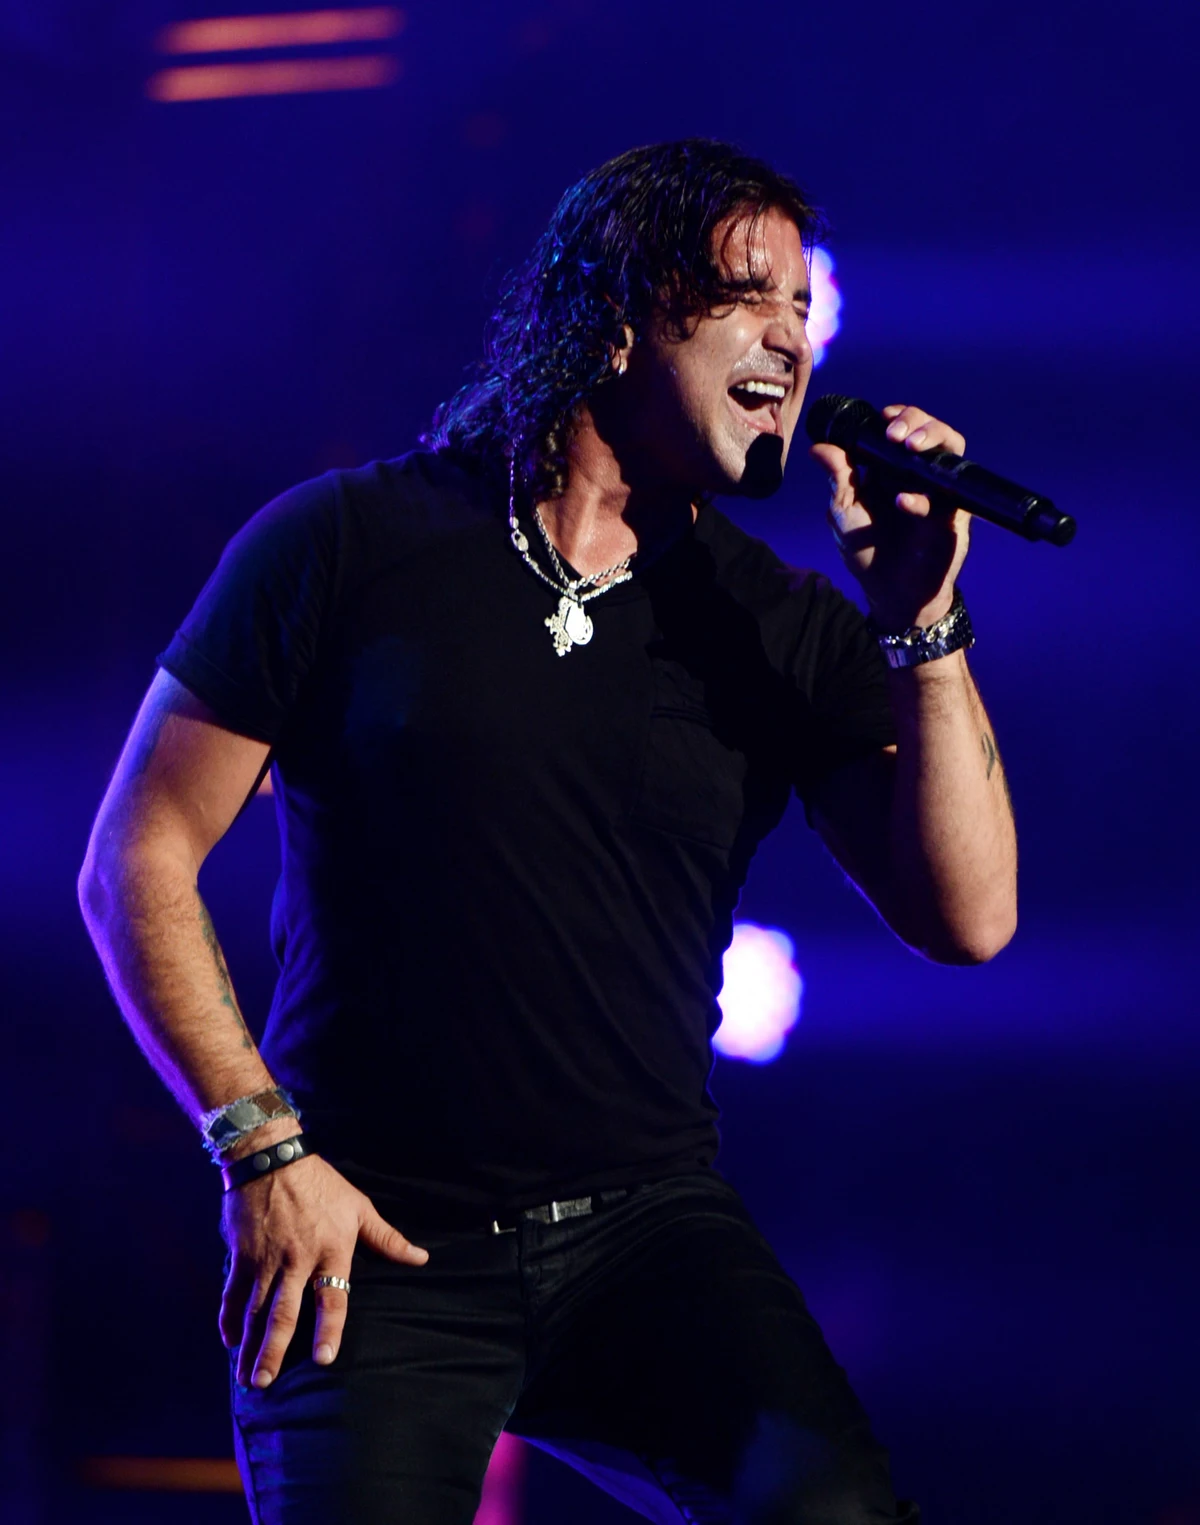 Scott Stapp's 'Proof of Life' Tour Coming to Sioux Falls